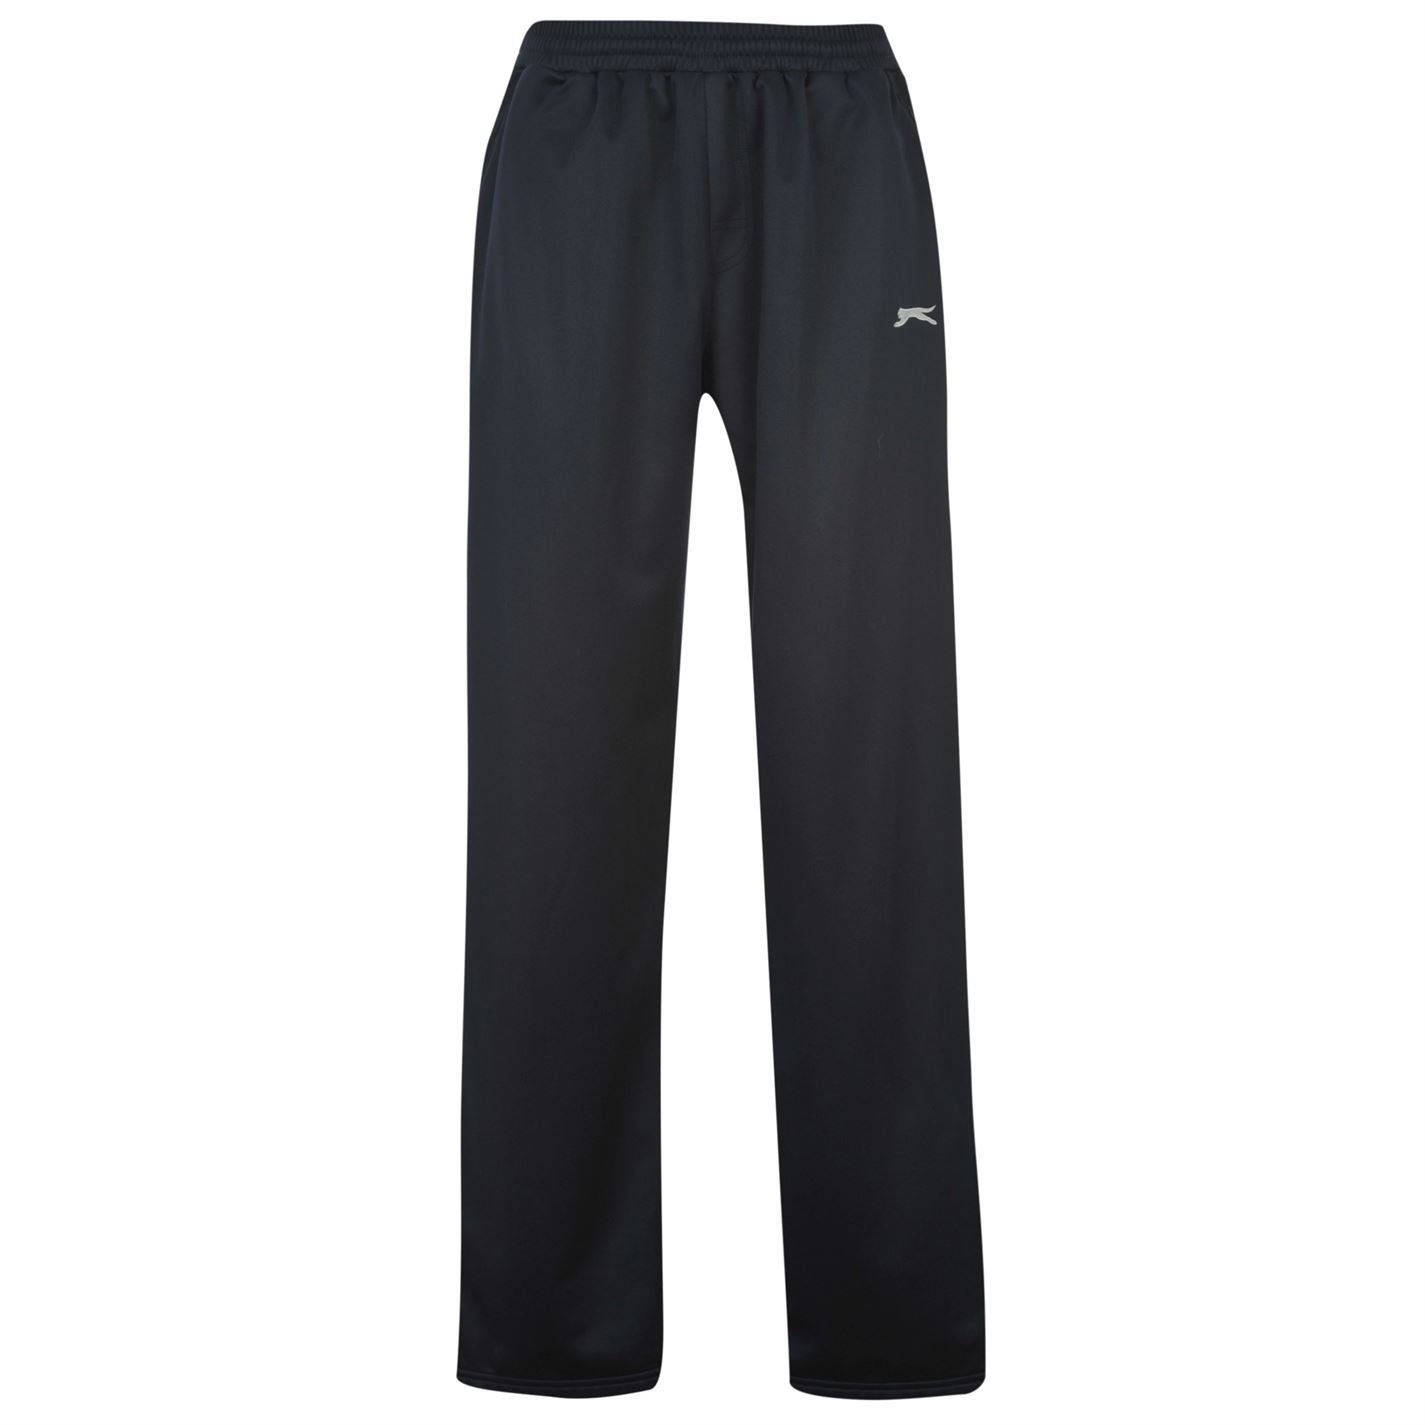 Buy Grey Track Pants for Men by HPS SPORTS Online | Ajio.com